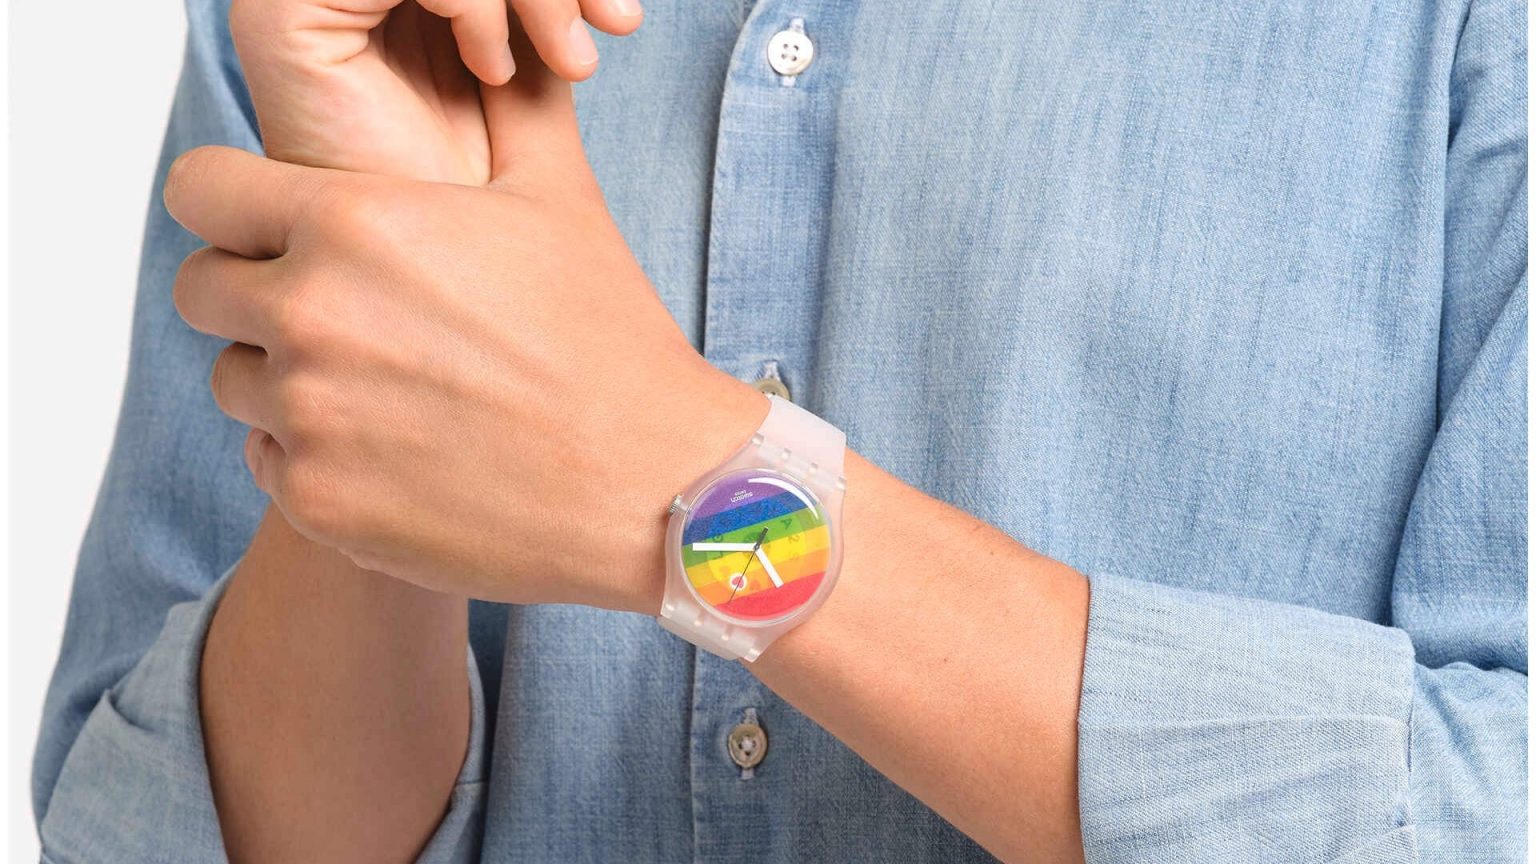 Swatch Pride-themed watches seizure sparks legal battle